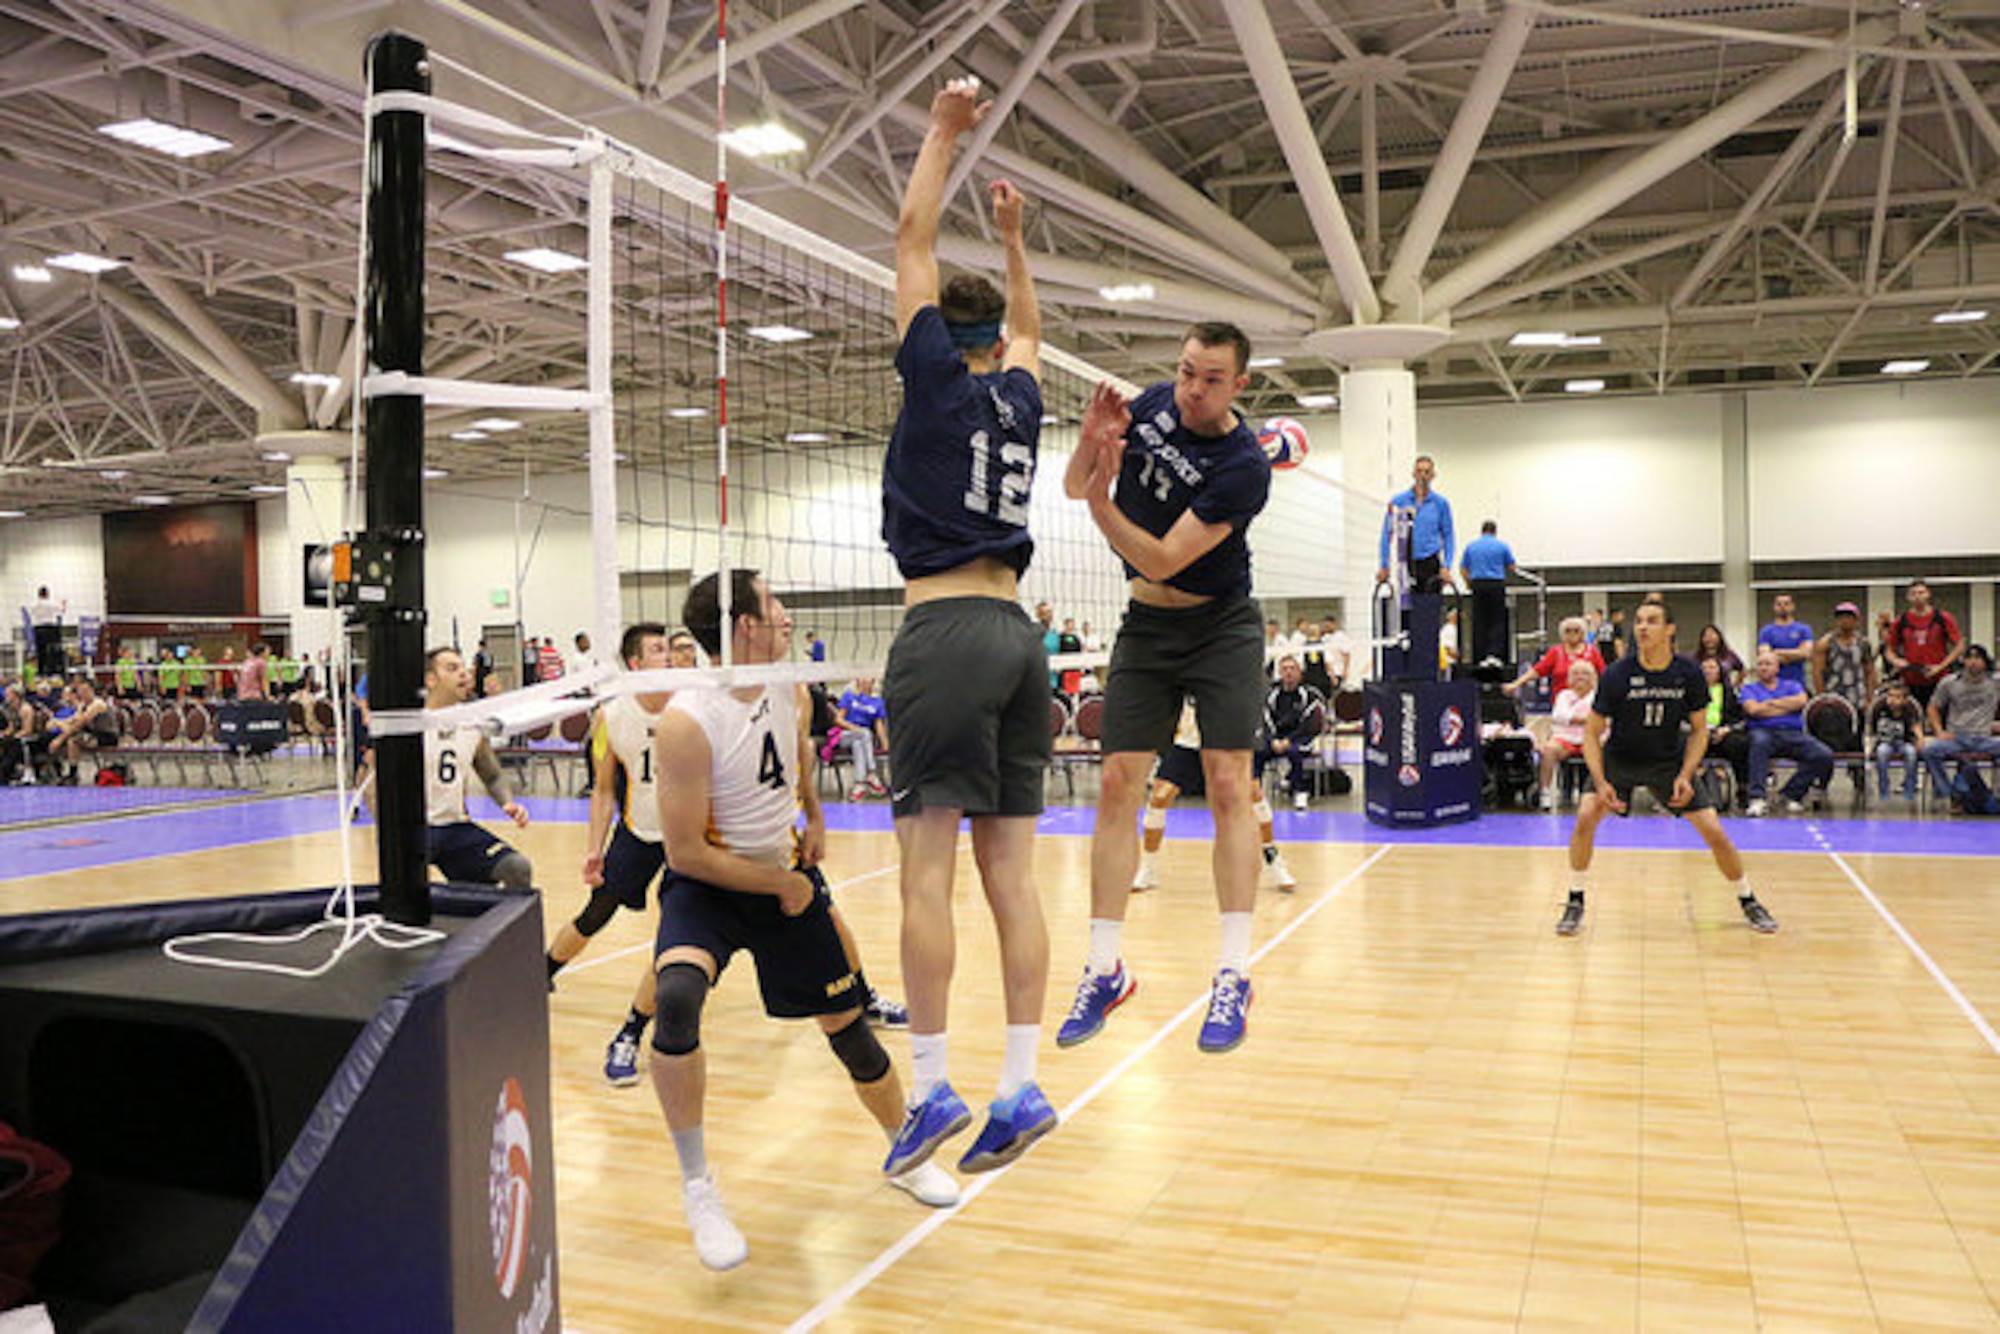 The Air Force men's volleyball team didn't surrender a set as it went undefeated in pool play. Overall, Air Force finished 6-2 and ninth out of 58 teams as part of the USA Volleyball Nationals.